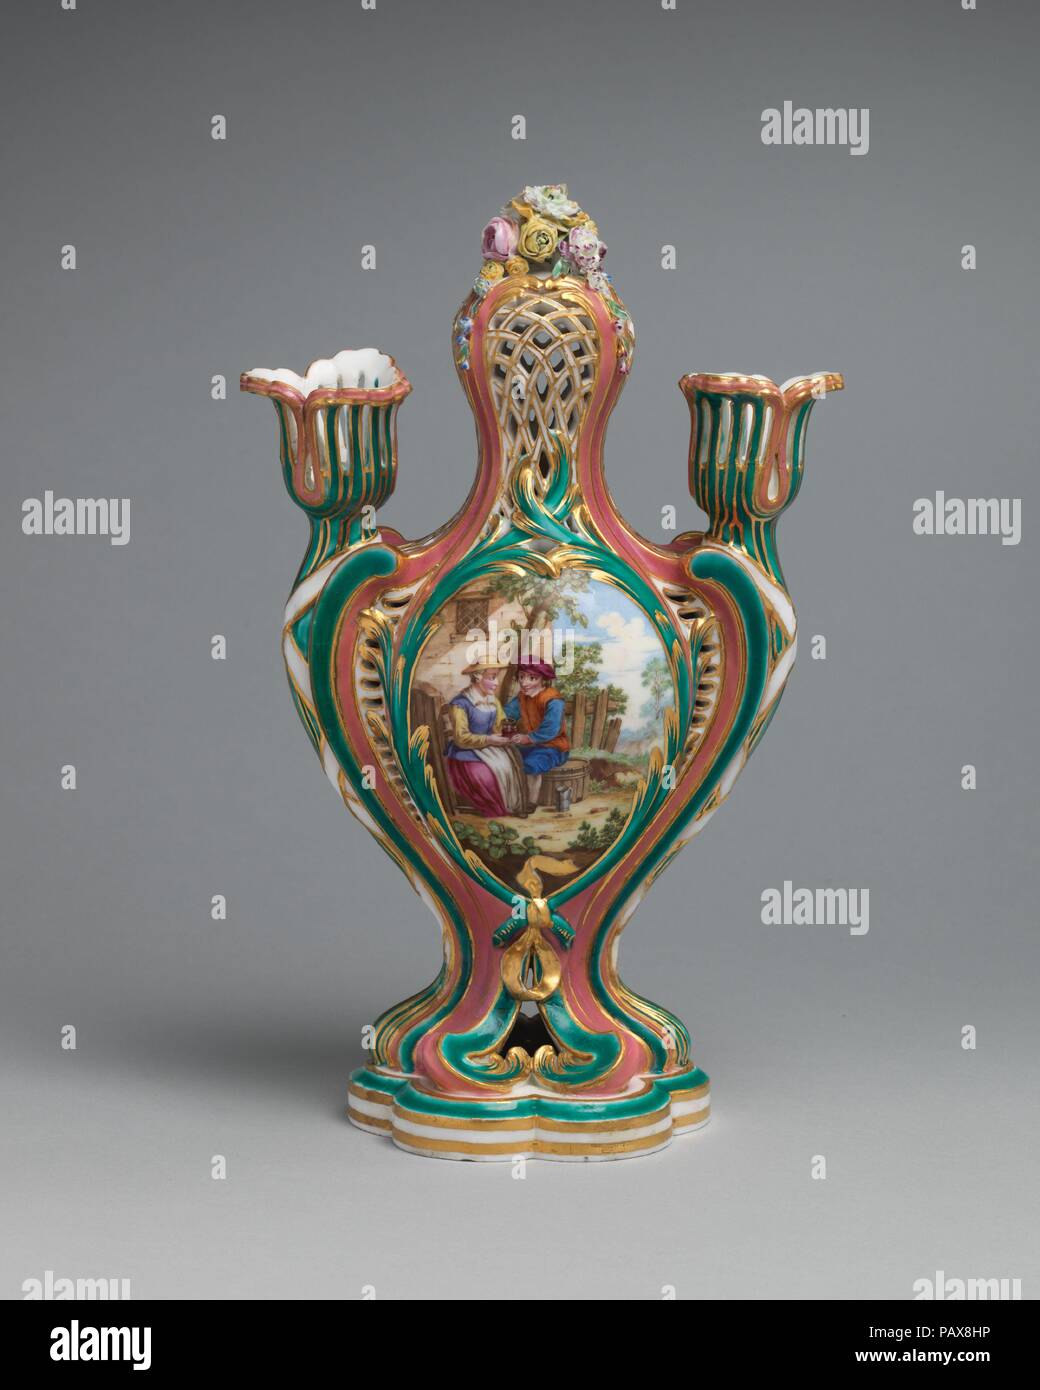 Potpourri vase with candleholders (pot-pourri à bobêche) (one of a pair). Culture: French, Sèvres. Decorator: Figural decoration probably by Charles Nicolas Dodin (French, Versailles 1734-1803 Sèvres); Flower decoration attributed to Pierre-Louis-Philippe (Armand II, called le jeune) (French, working 1746-88, died 1788). Dimensions: Overall (confirmed): 9 1/2 x 6 1/16 x 3 5/8 in. (24.1 x 15.4 x 9.2 cm). Factory: Sèvres Manufactory (French, 1740-present). Modeler: Attributed to Jean-Claude Duplessis (French, ca. 1695-1774, active 1748-74). Date: 1760.  These potpourri vases with candleholders r Stock Photo